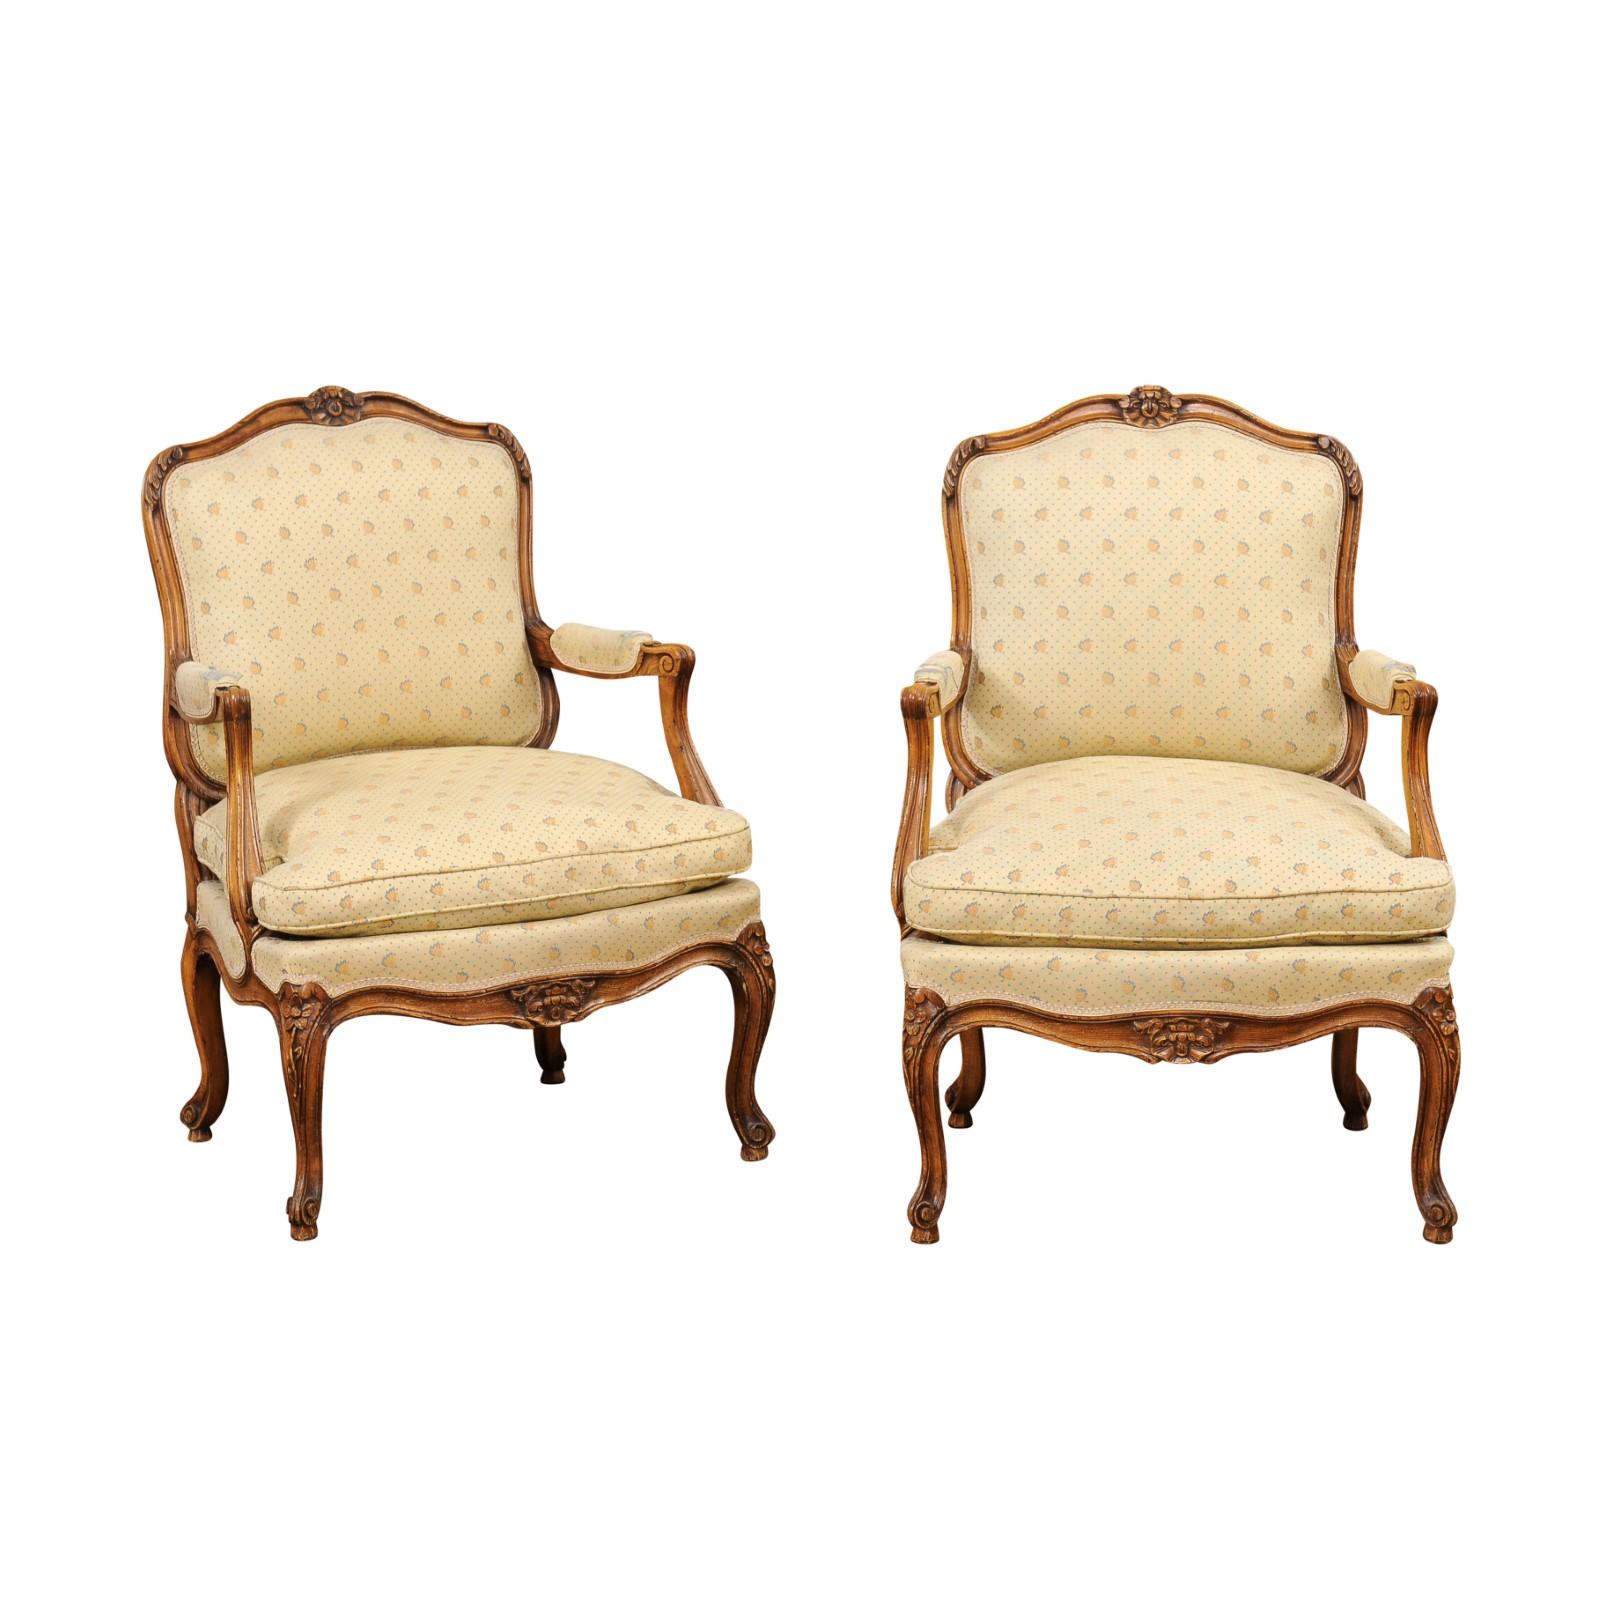 A pair of French Louis XV style walnut armchairs from the 20th century with carved floral décor, scrolling knuckles, cabriole legs and upholstery. Evoking the grandeur of French royalty, this exquisite pair of Louis XV style walnut armchairs, or